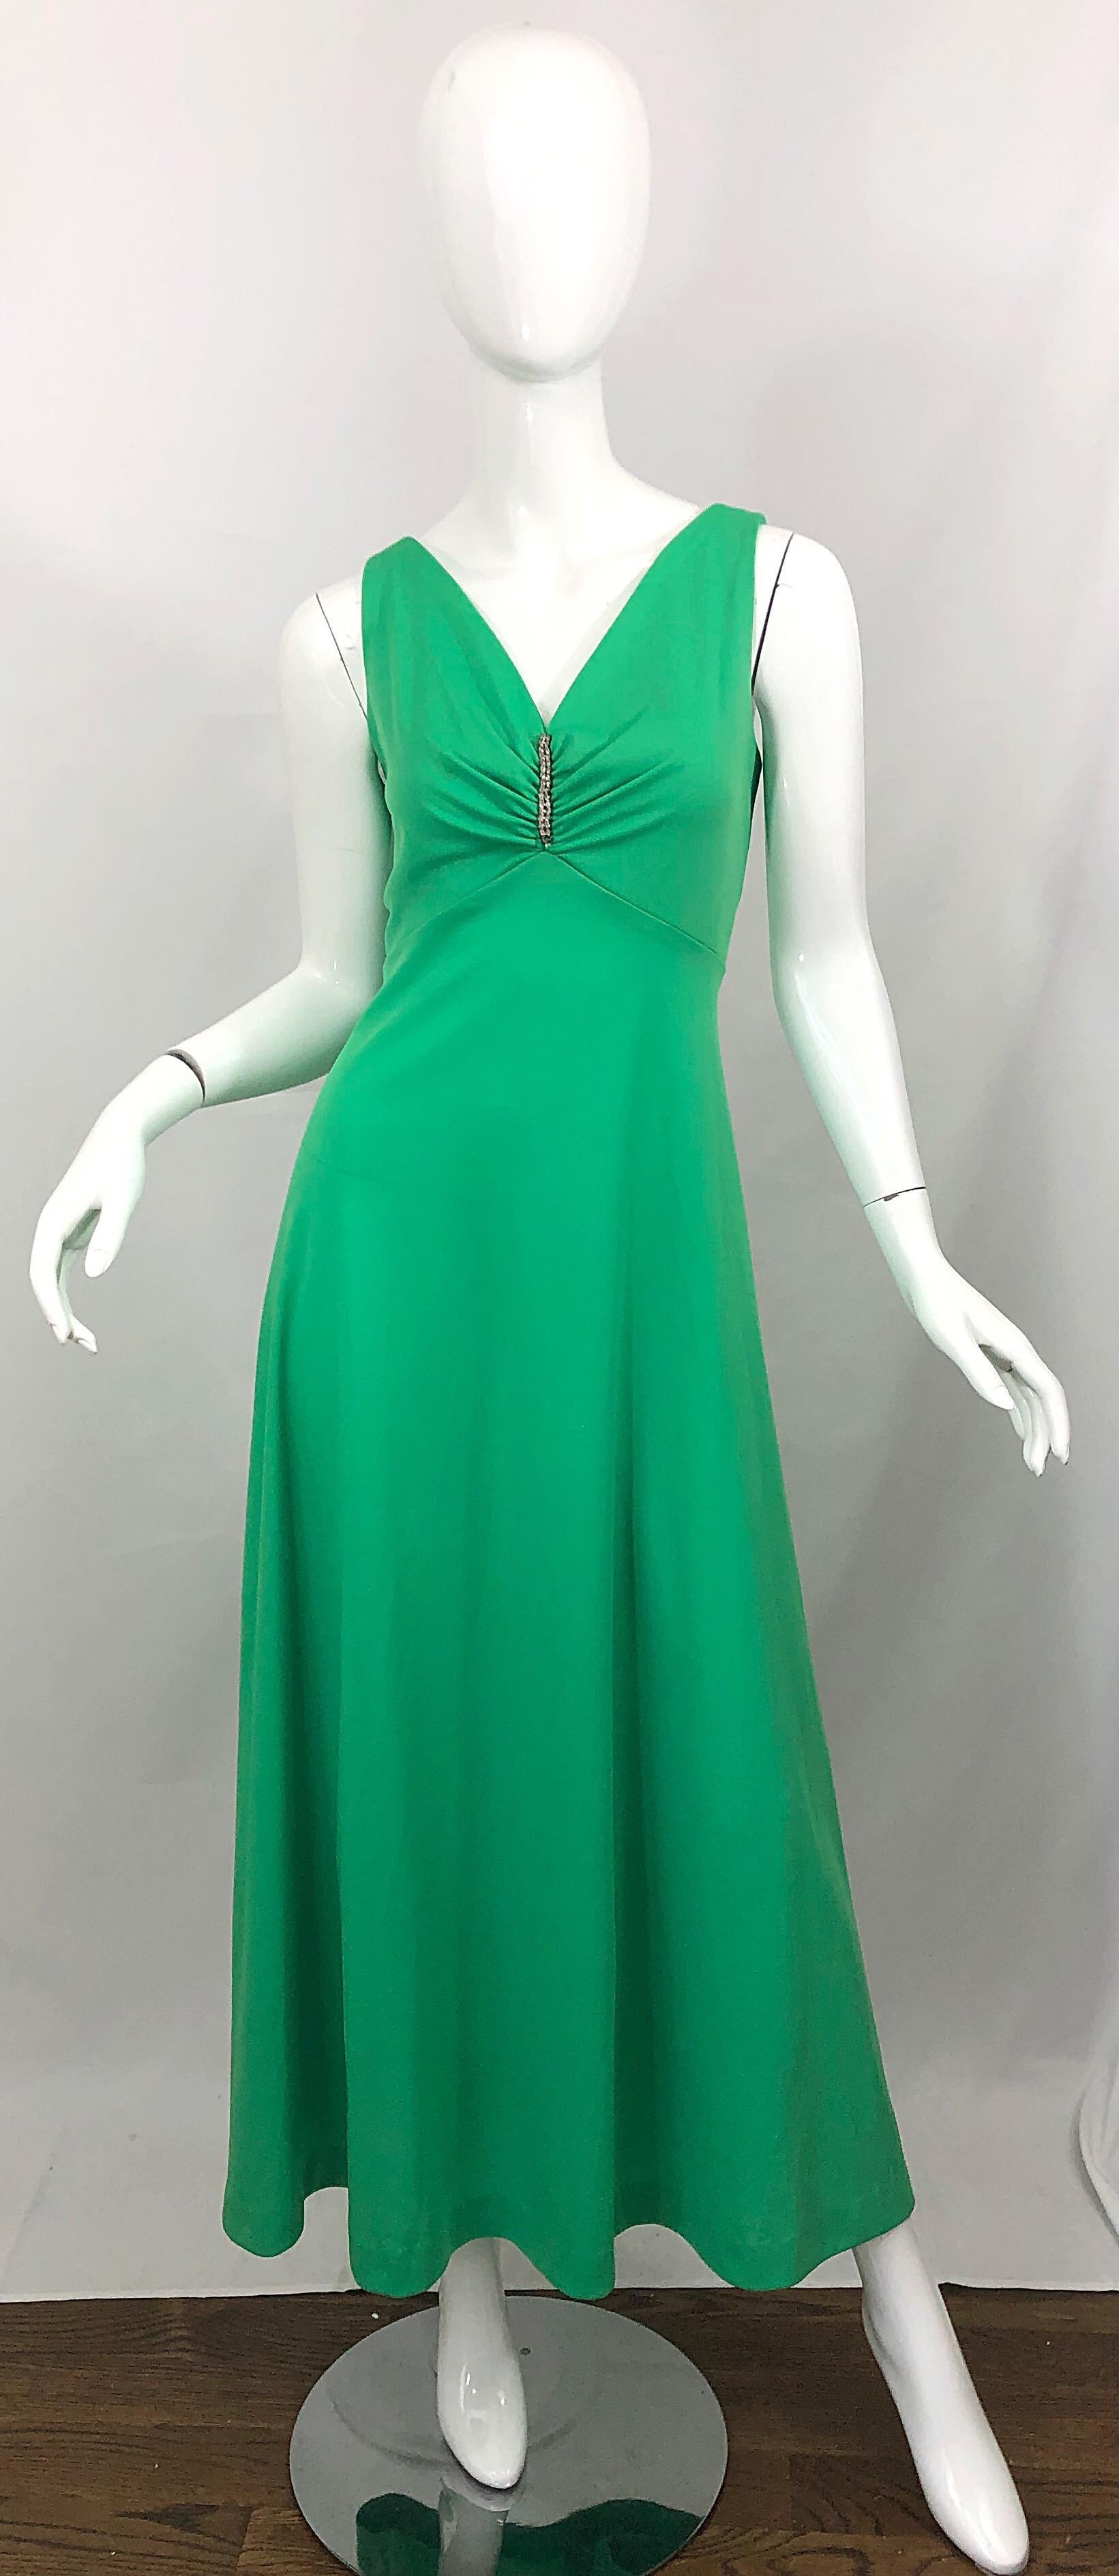 Beautiful 1970s kelly green rhinestone encrusted jersey maxi dress! Features sparkling rhinestones down the center tailored bodice. Forgiving and flattering full skirt. Hidden metal zipper up the back with hook-and-eye closure. Can easily work for